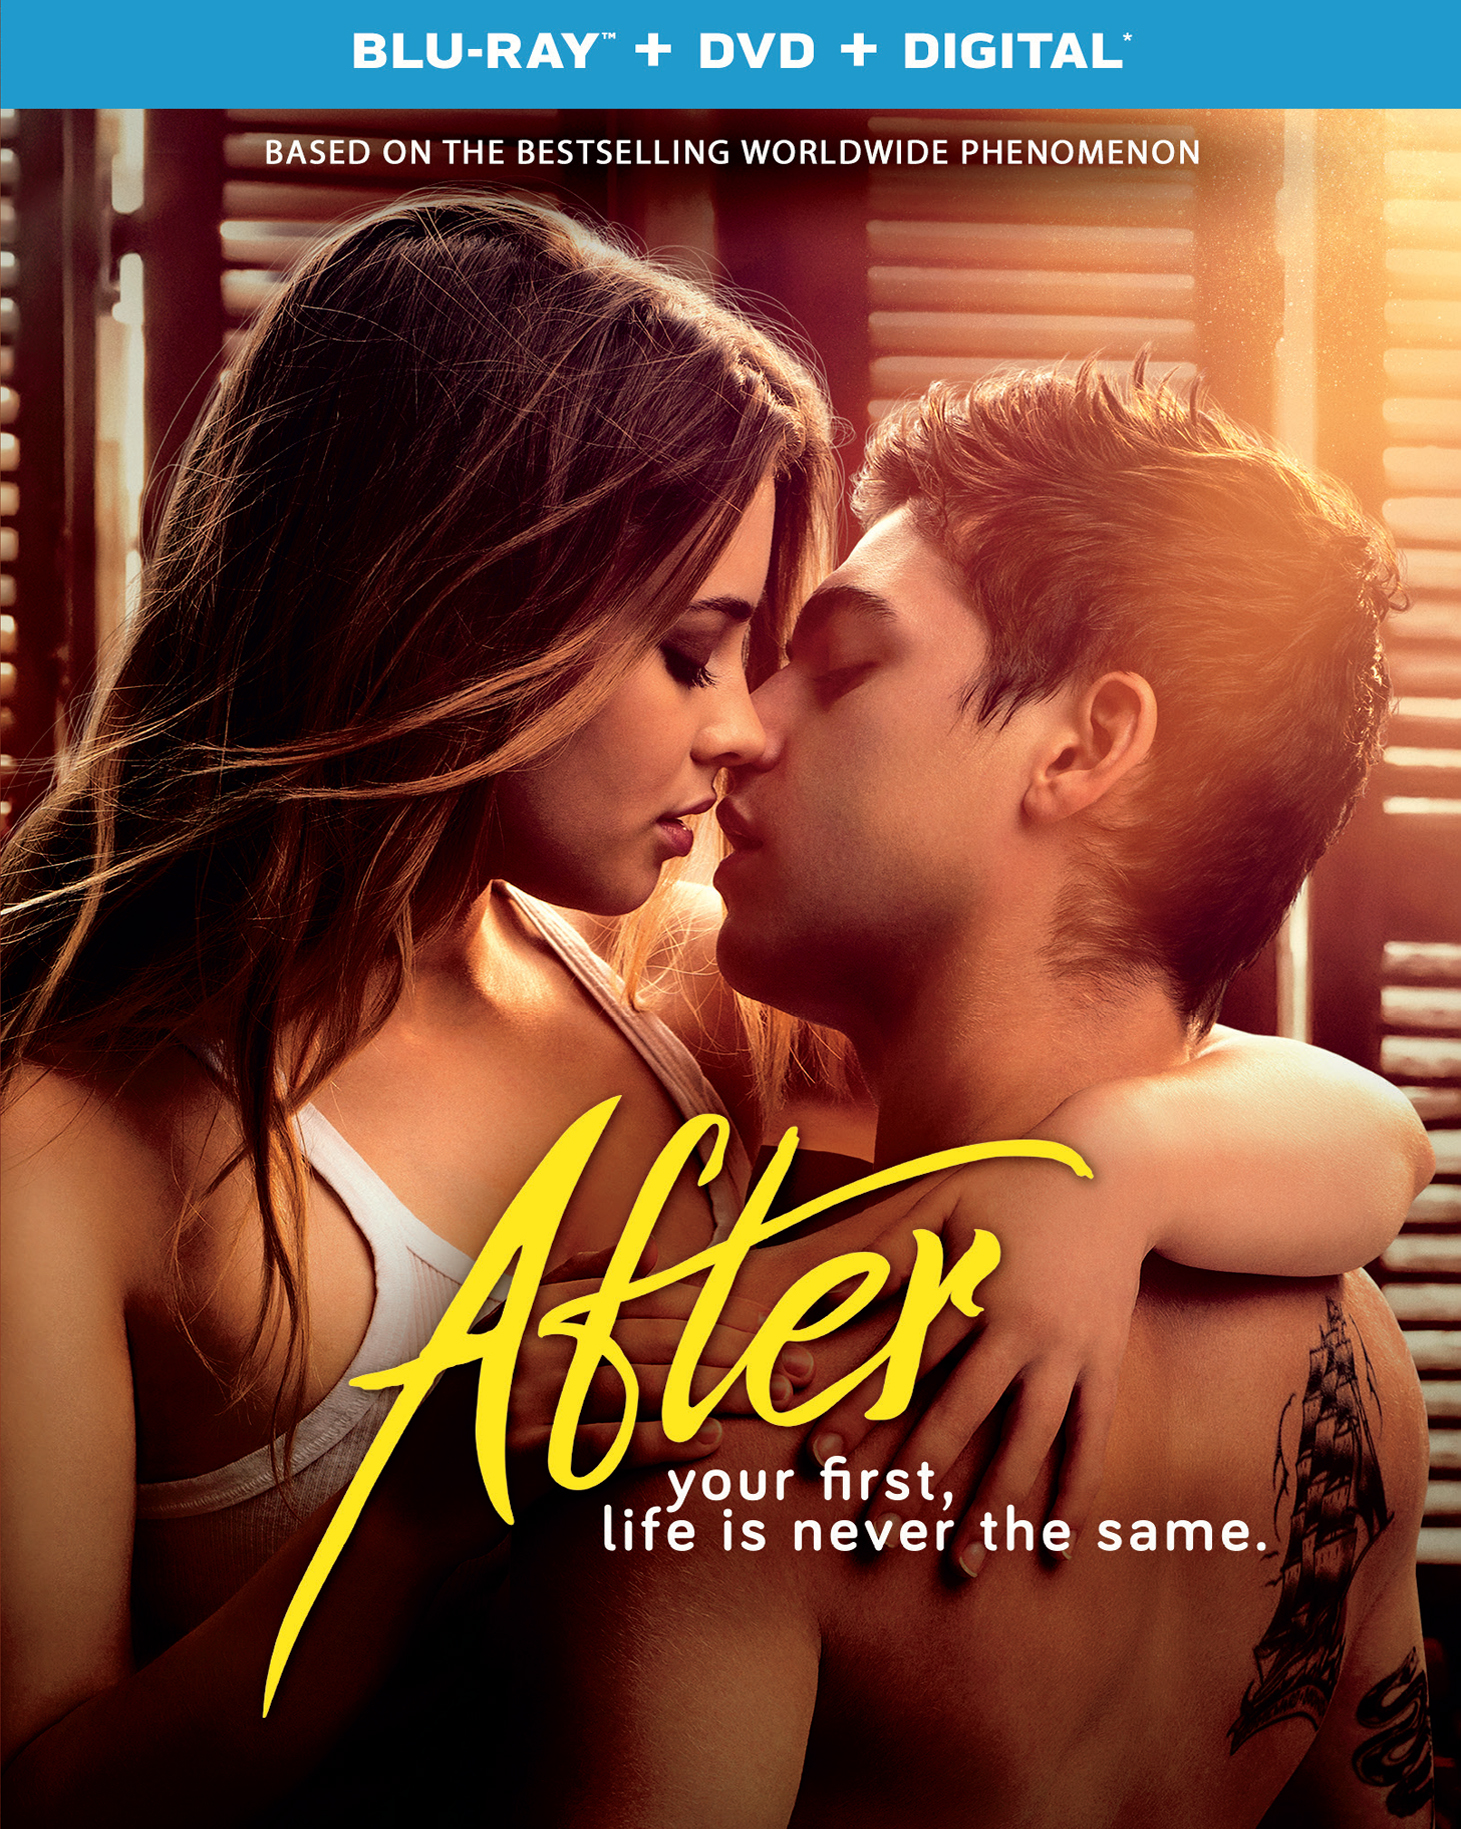 Inanna Sarkis Porn - After [Includes Digital Copy] [Blu-ray/DVD] [2019] - Best Buy